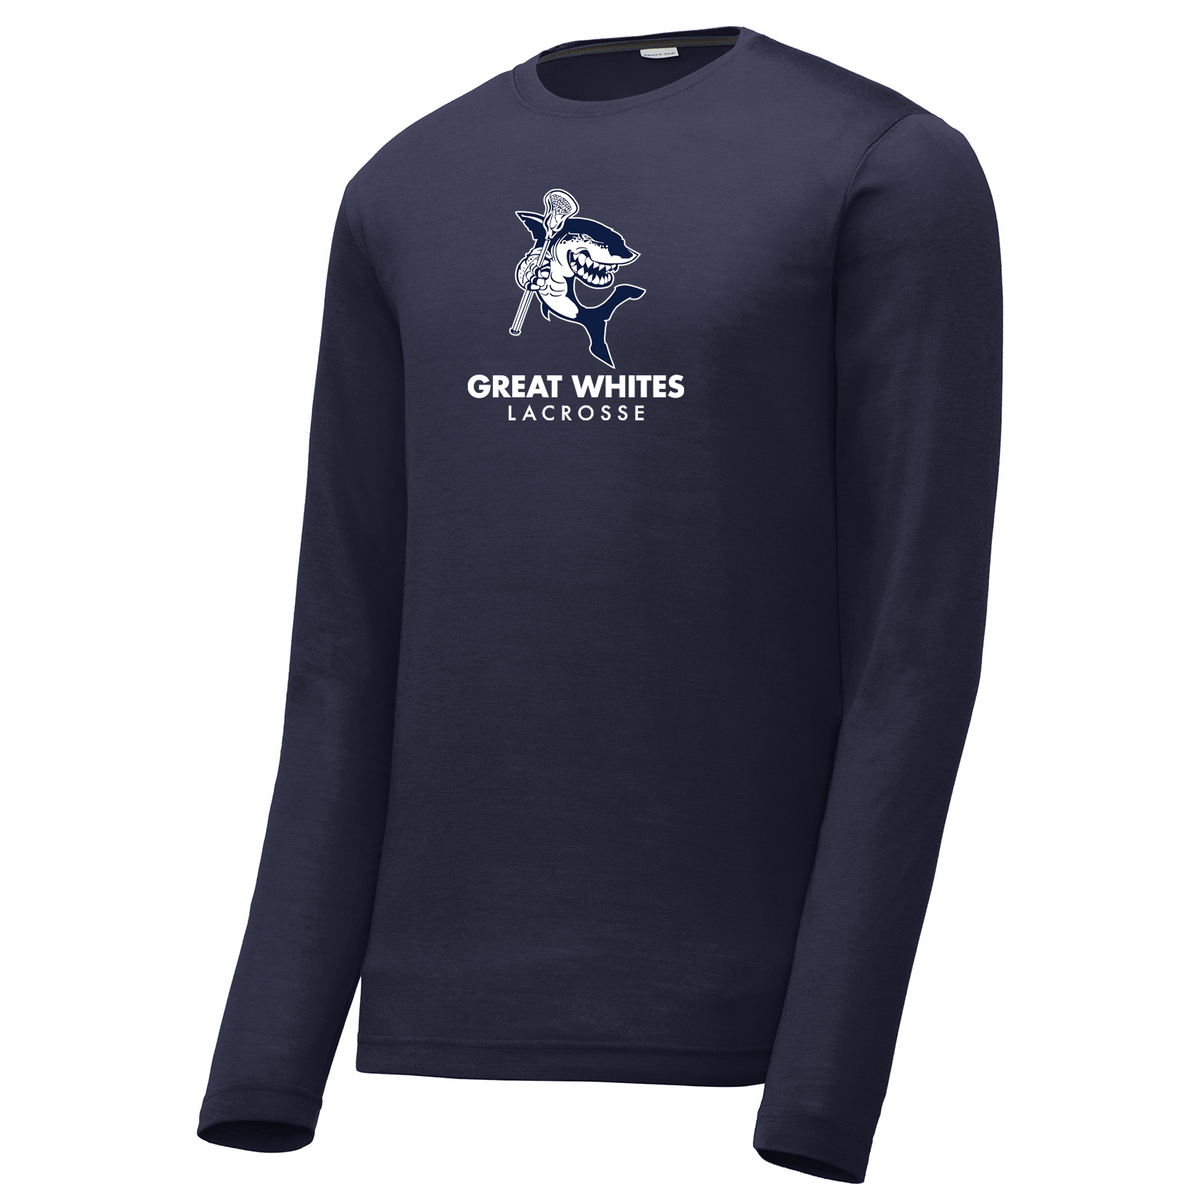 Great Whites Lacrosse Long Sleeve CottonTouch Performance Shirt